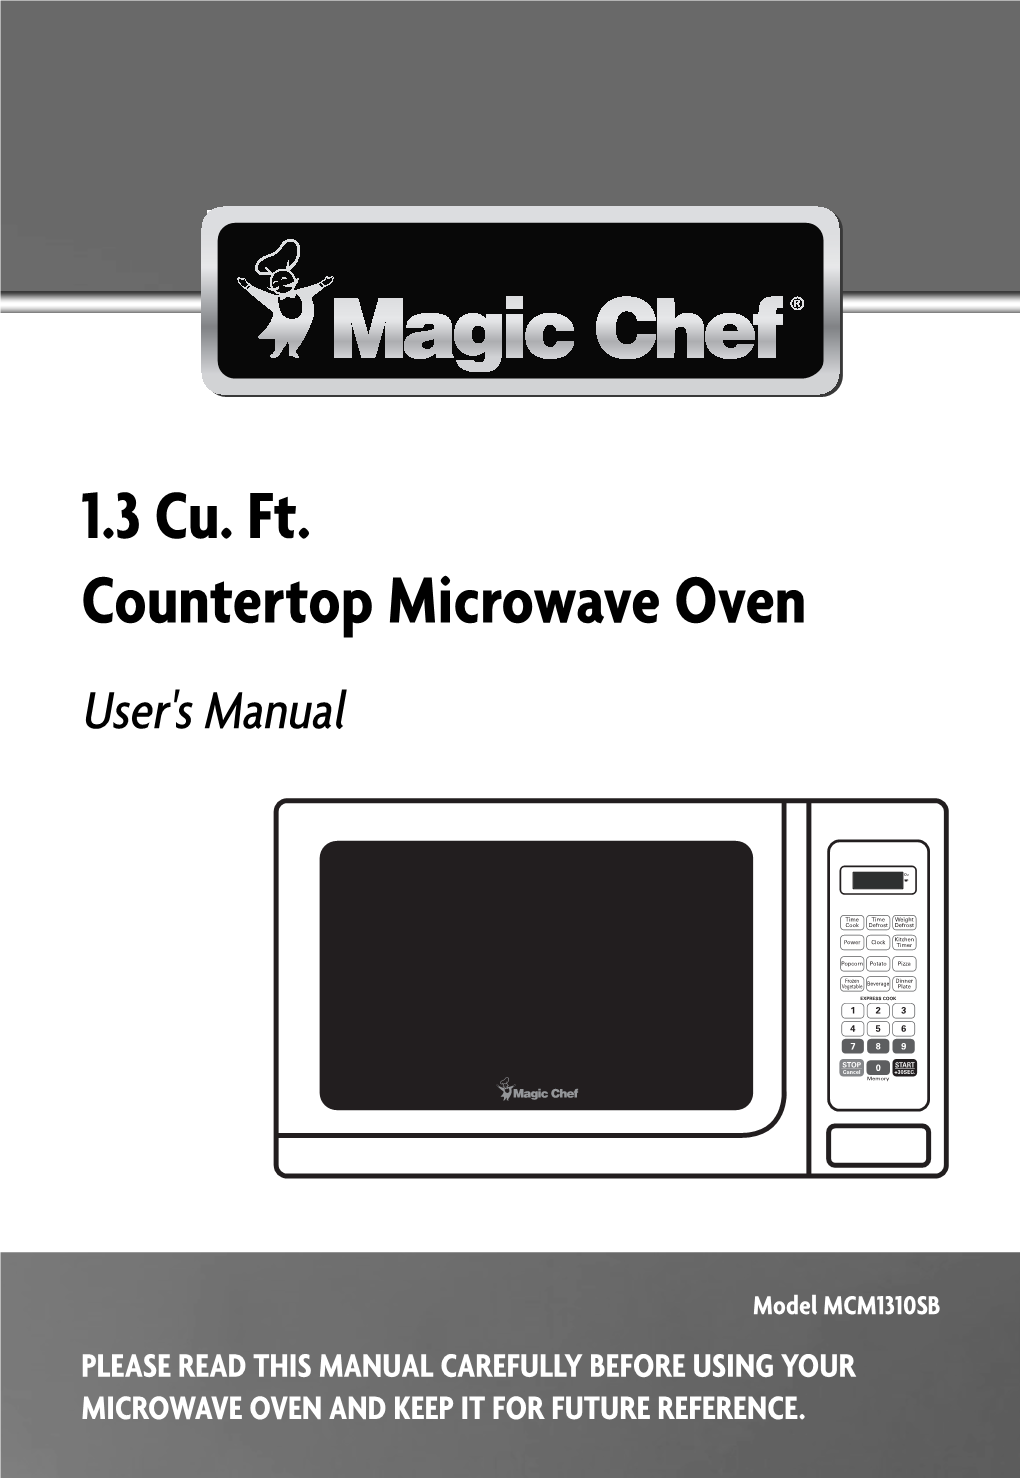 1.3 Cu. Ft. Countertop Microwave Oven User's Manual